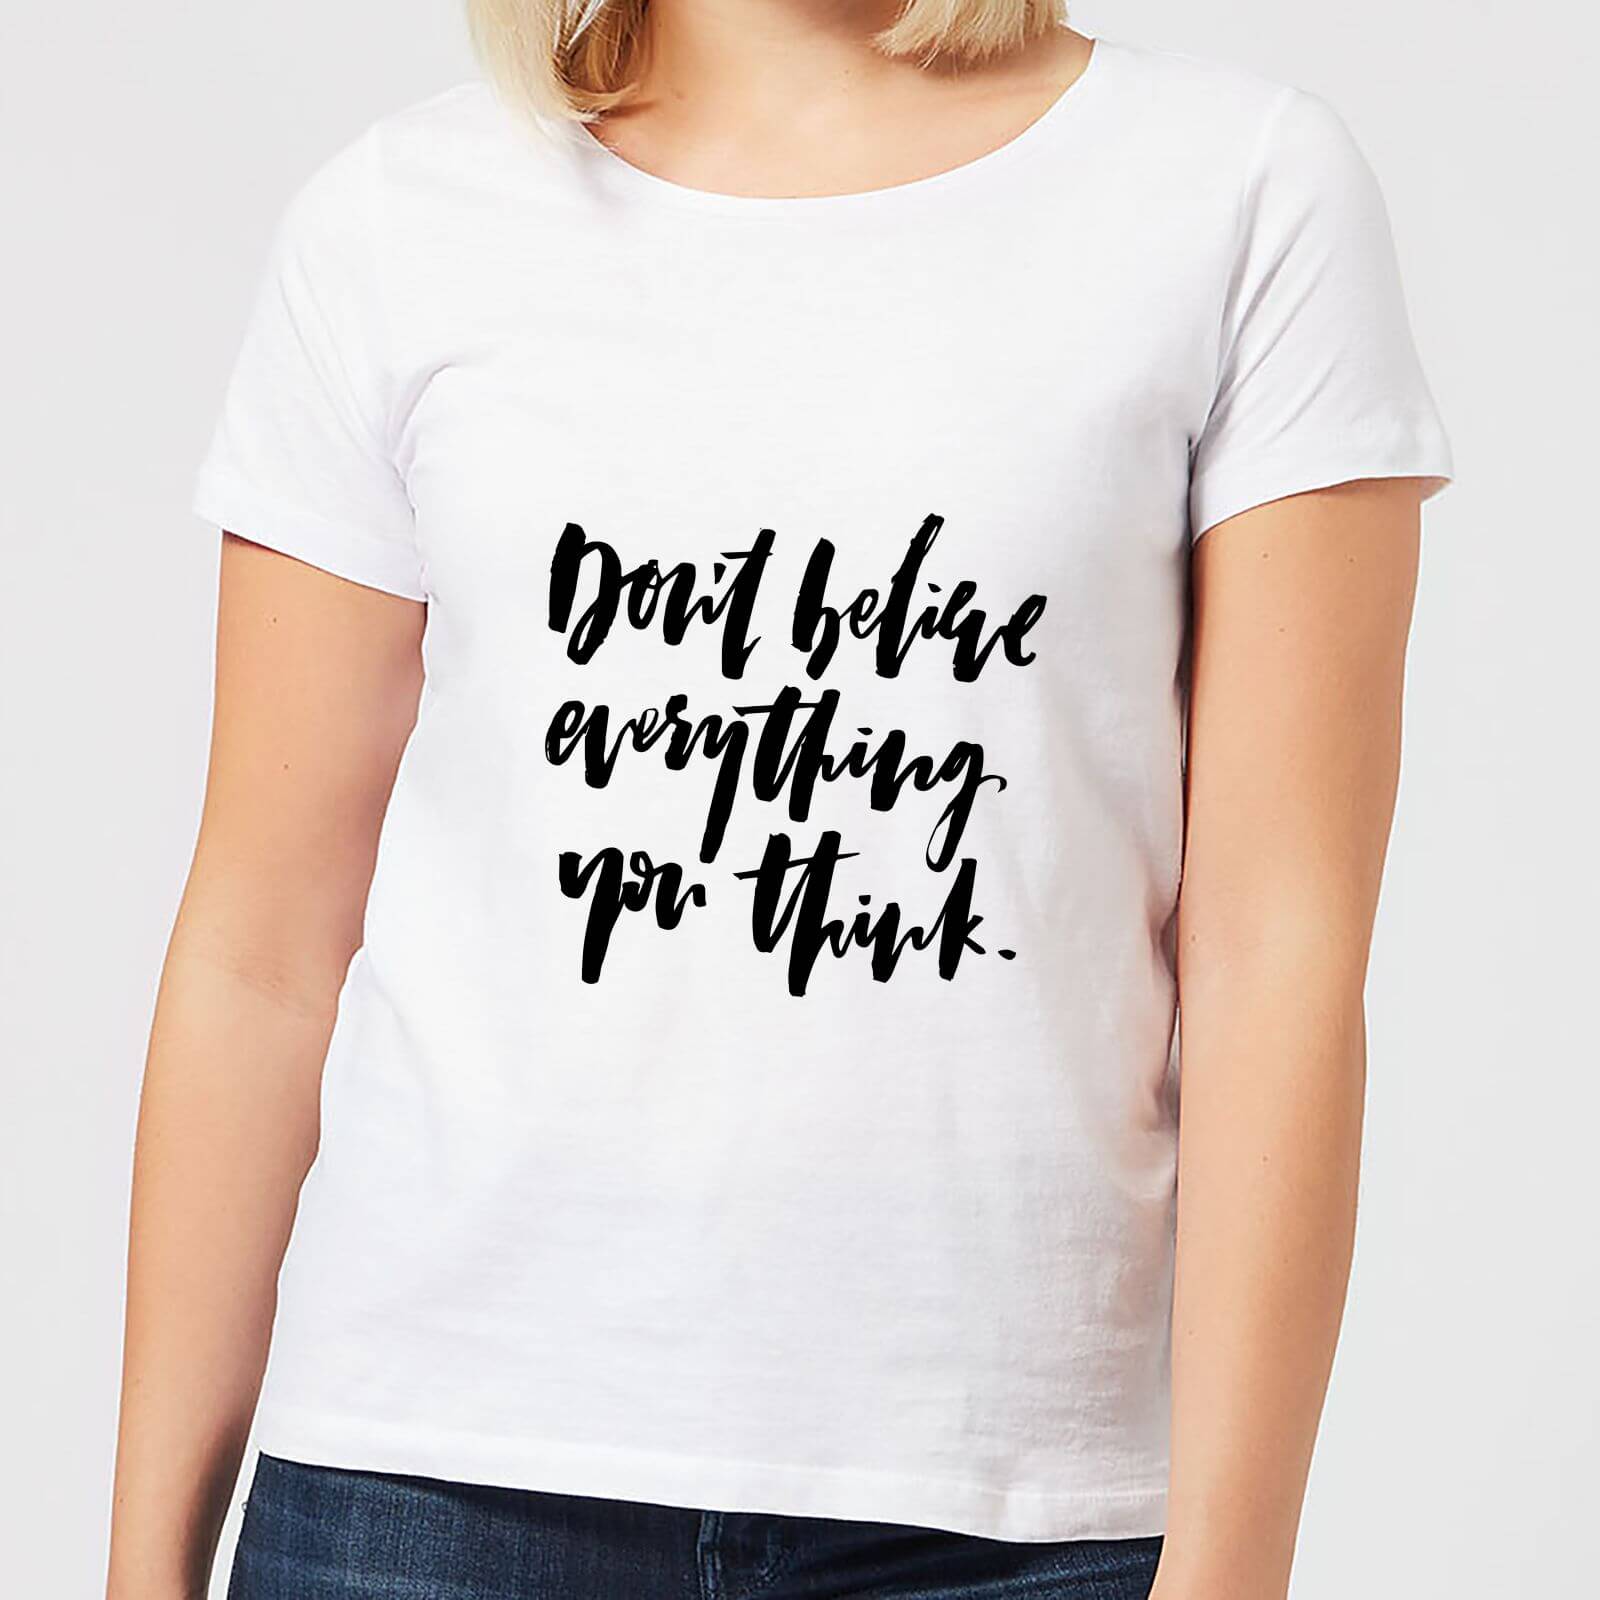 Don't Believe Everything You Think Women's T-Shirt - White - M - White